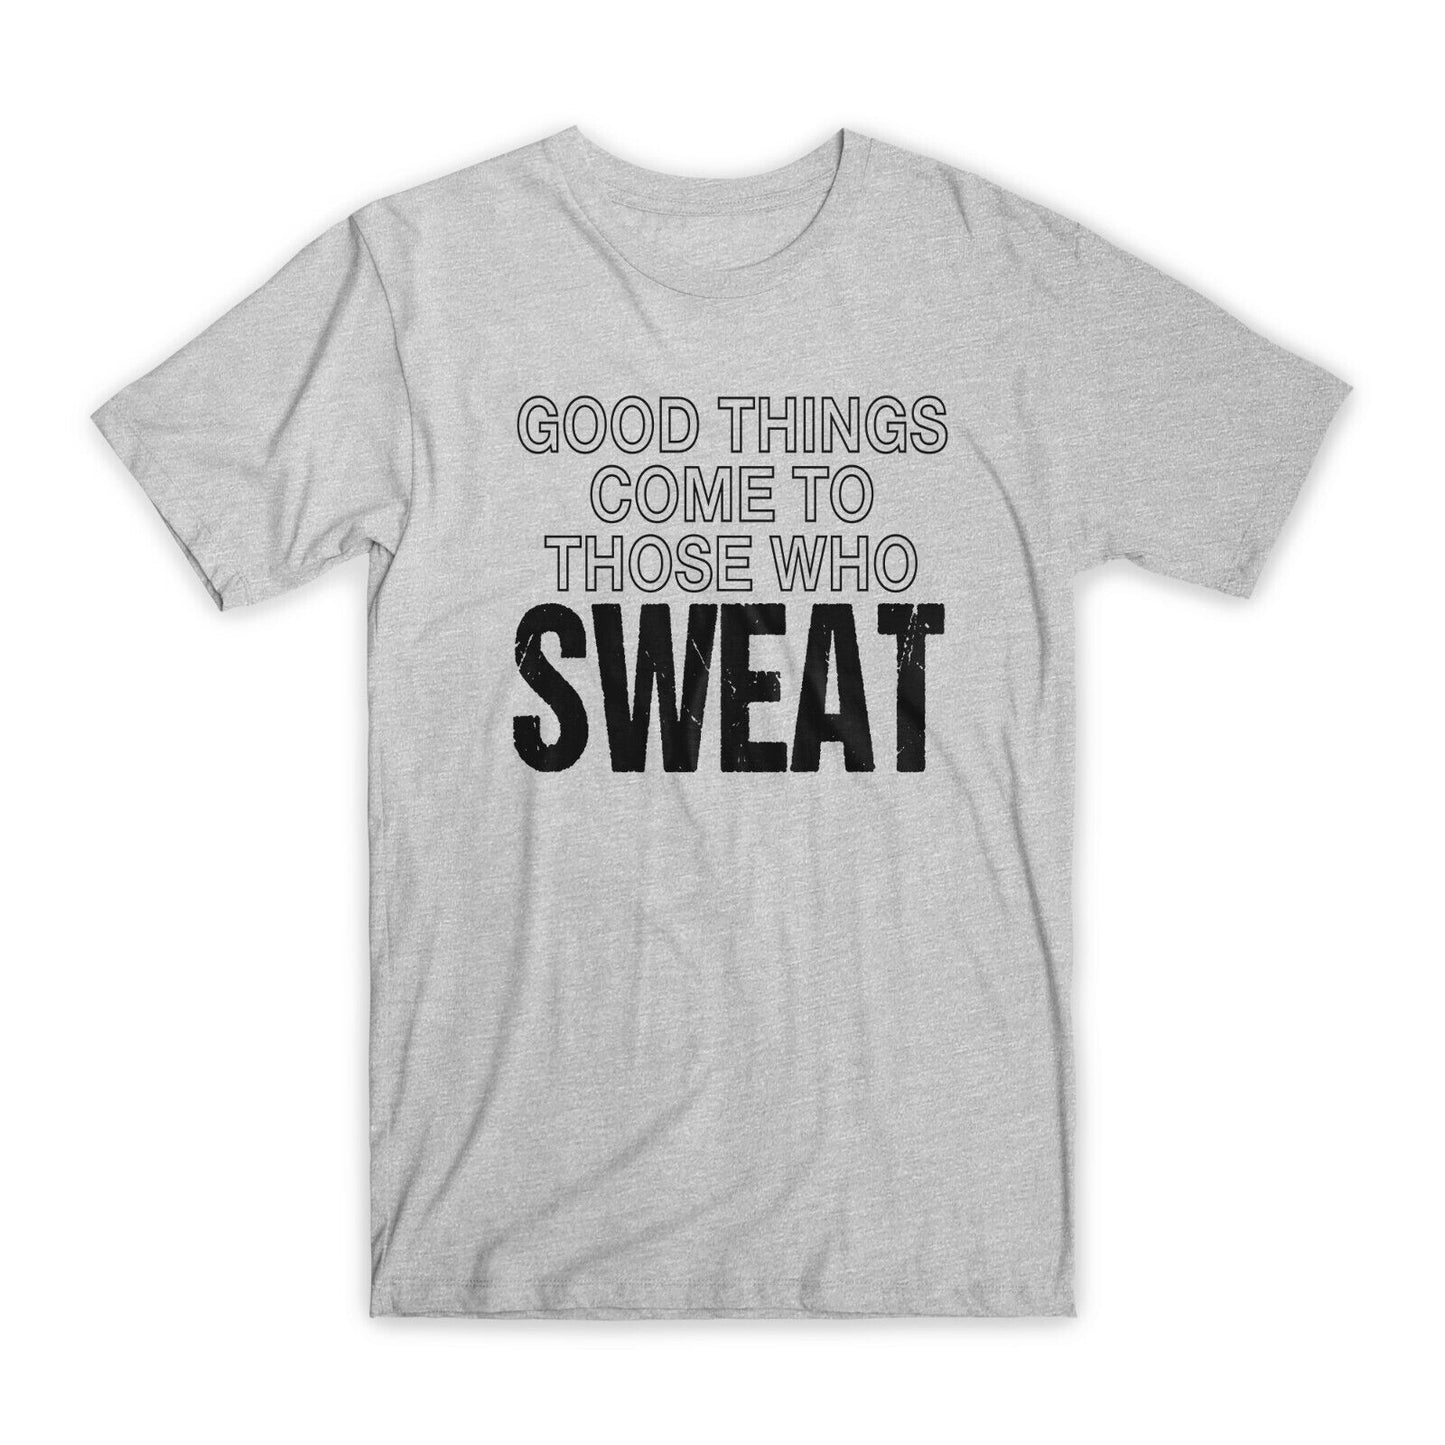 Good Things Come To Those Who Sweat T-Shirt Premium Soft Cotton Funny T Gift NEW